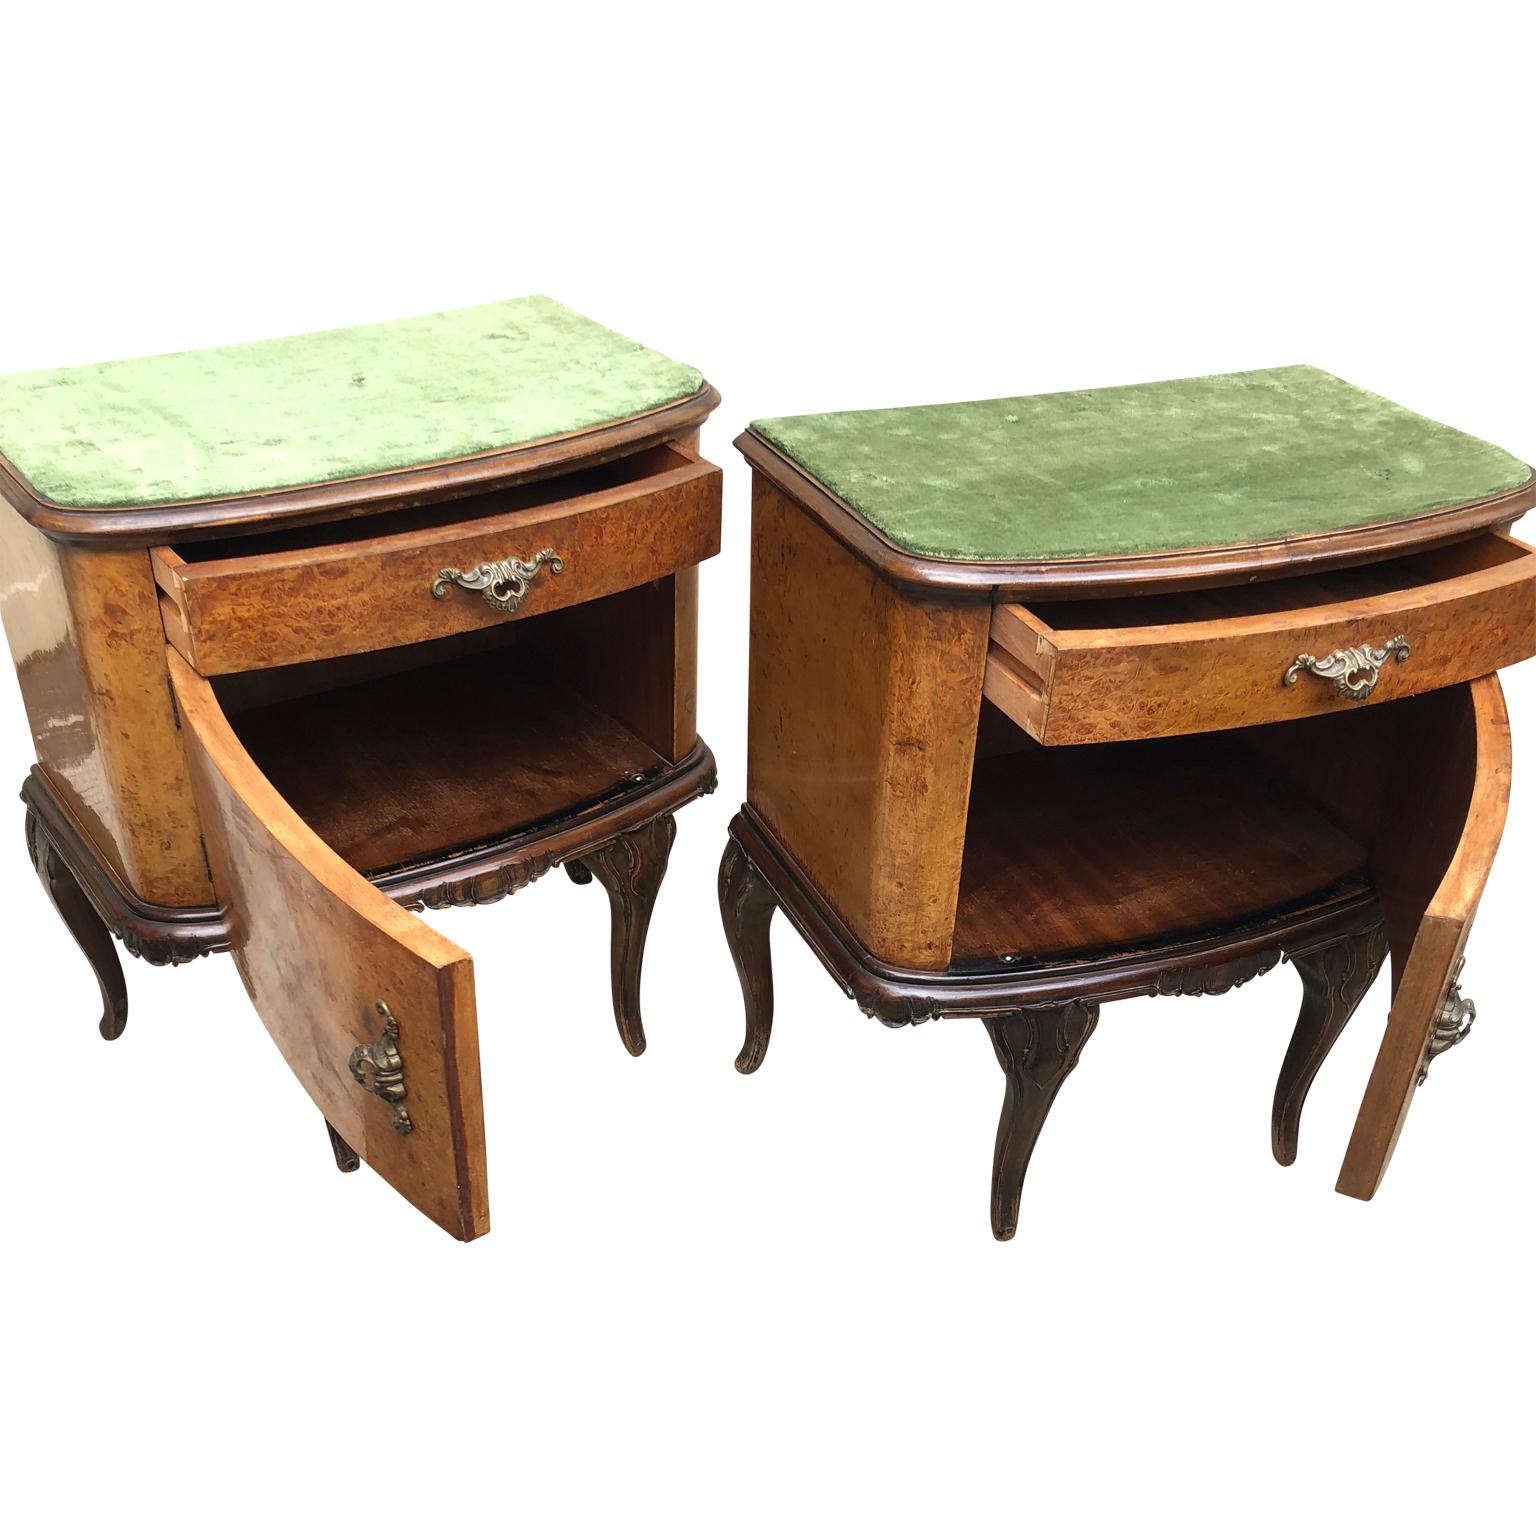 Pair of Italian Rococo style bedside tables.

Tables has a green vintage corduroy fabric top. Custom-made glass top can be included if requested.